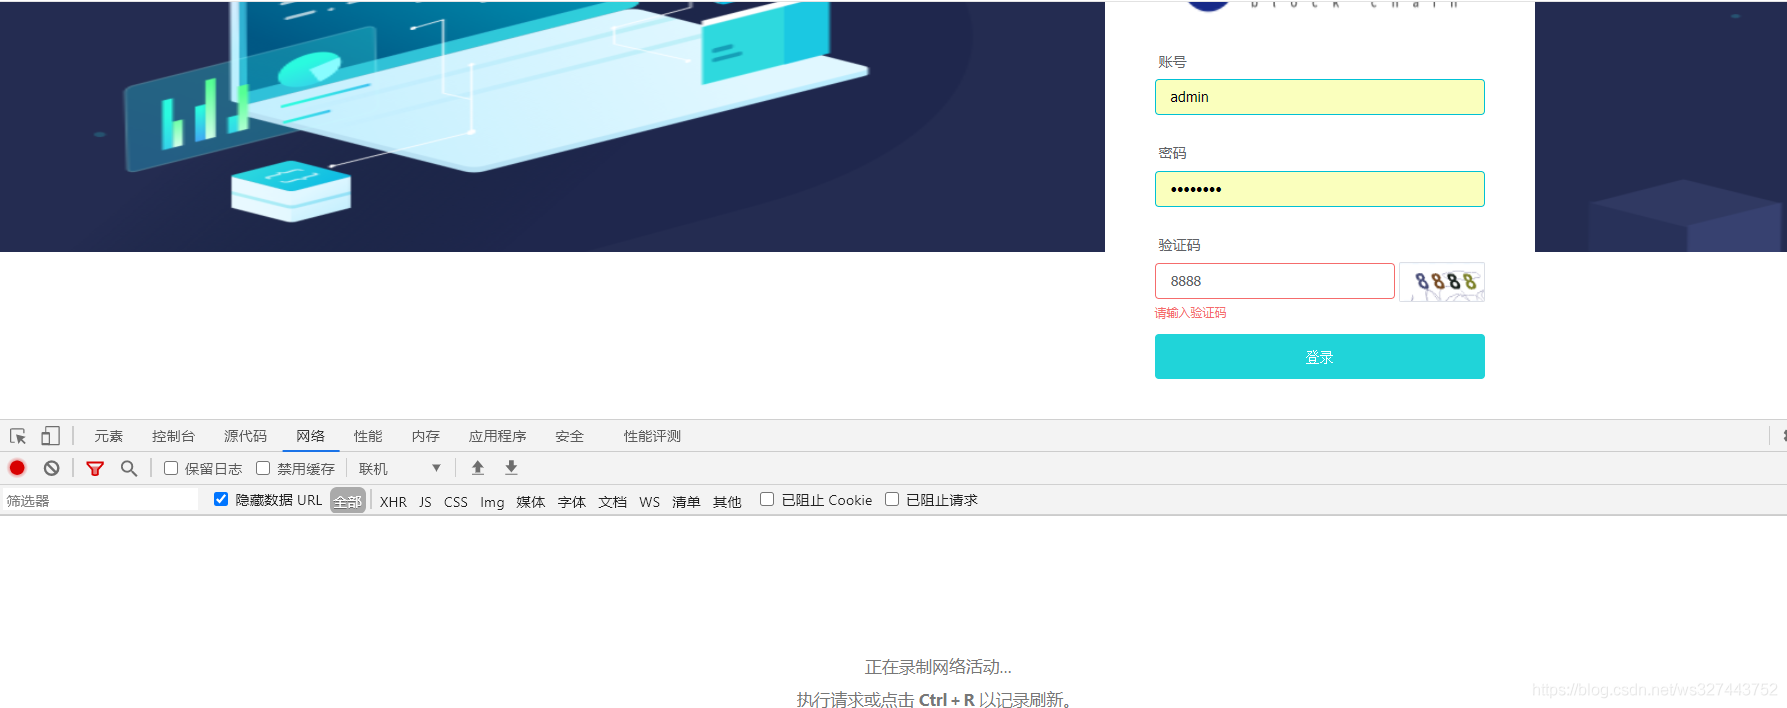 fisco bcos 调用接口报错WeBASE-Node-Manager user not logged in 版本：v1.5.2